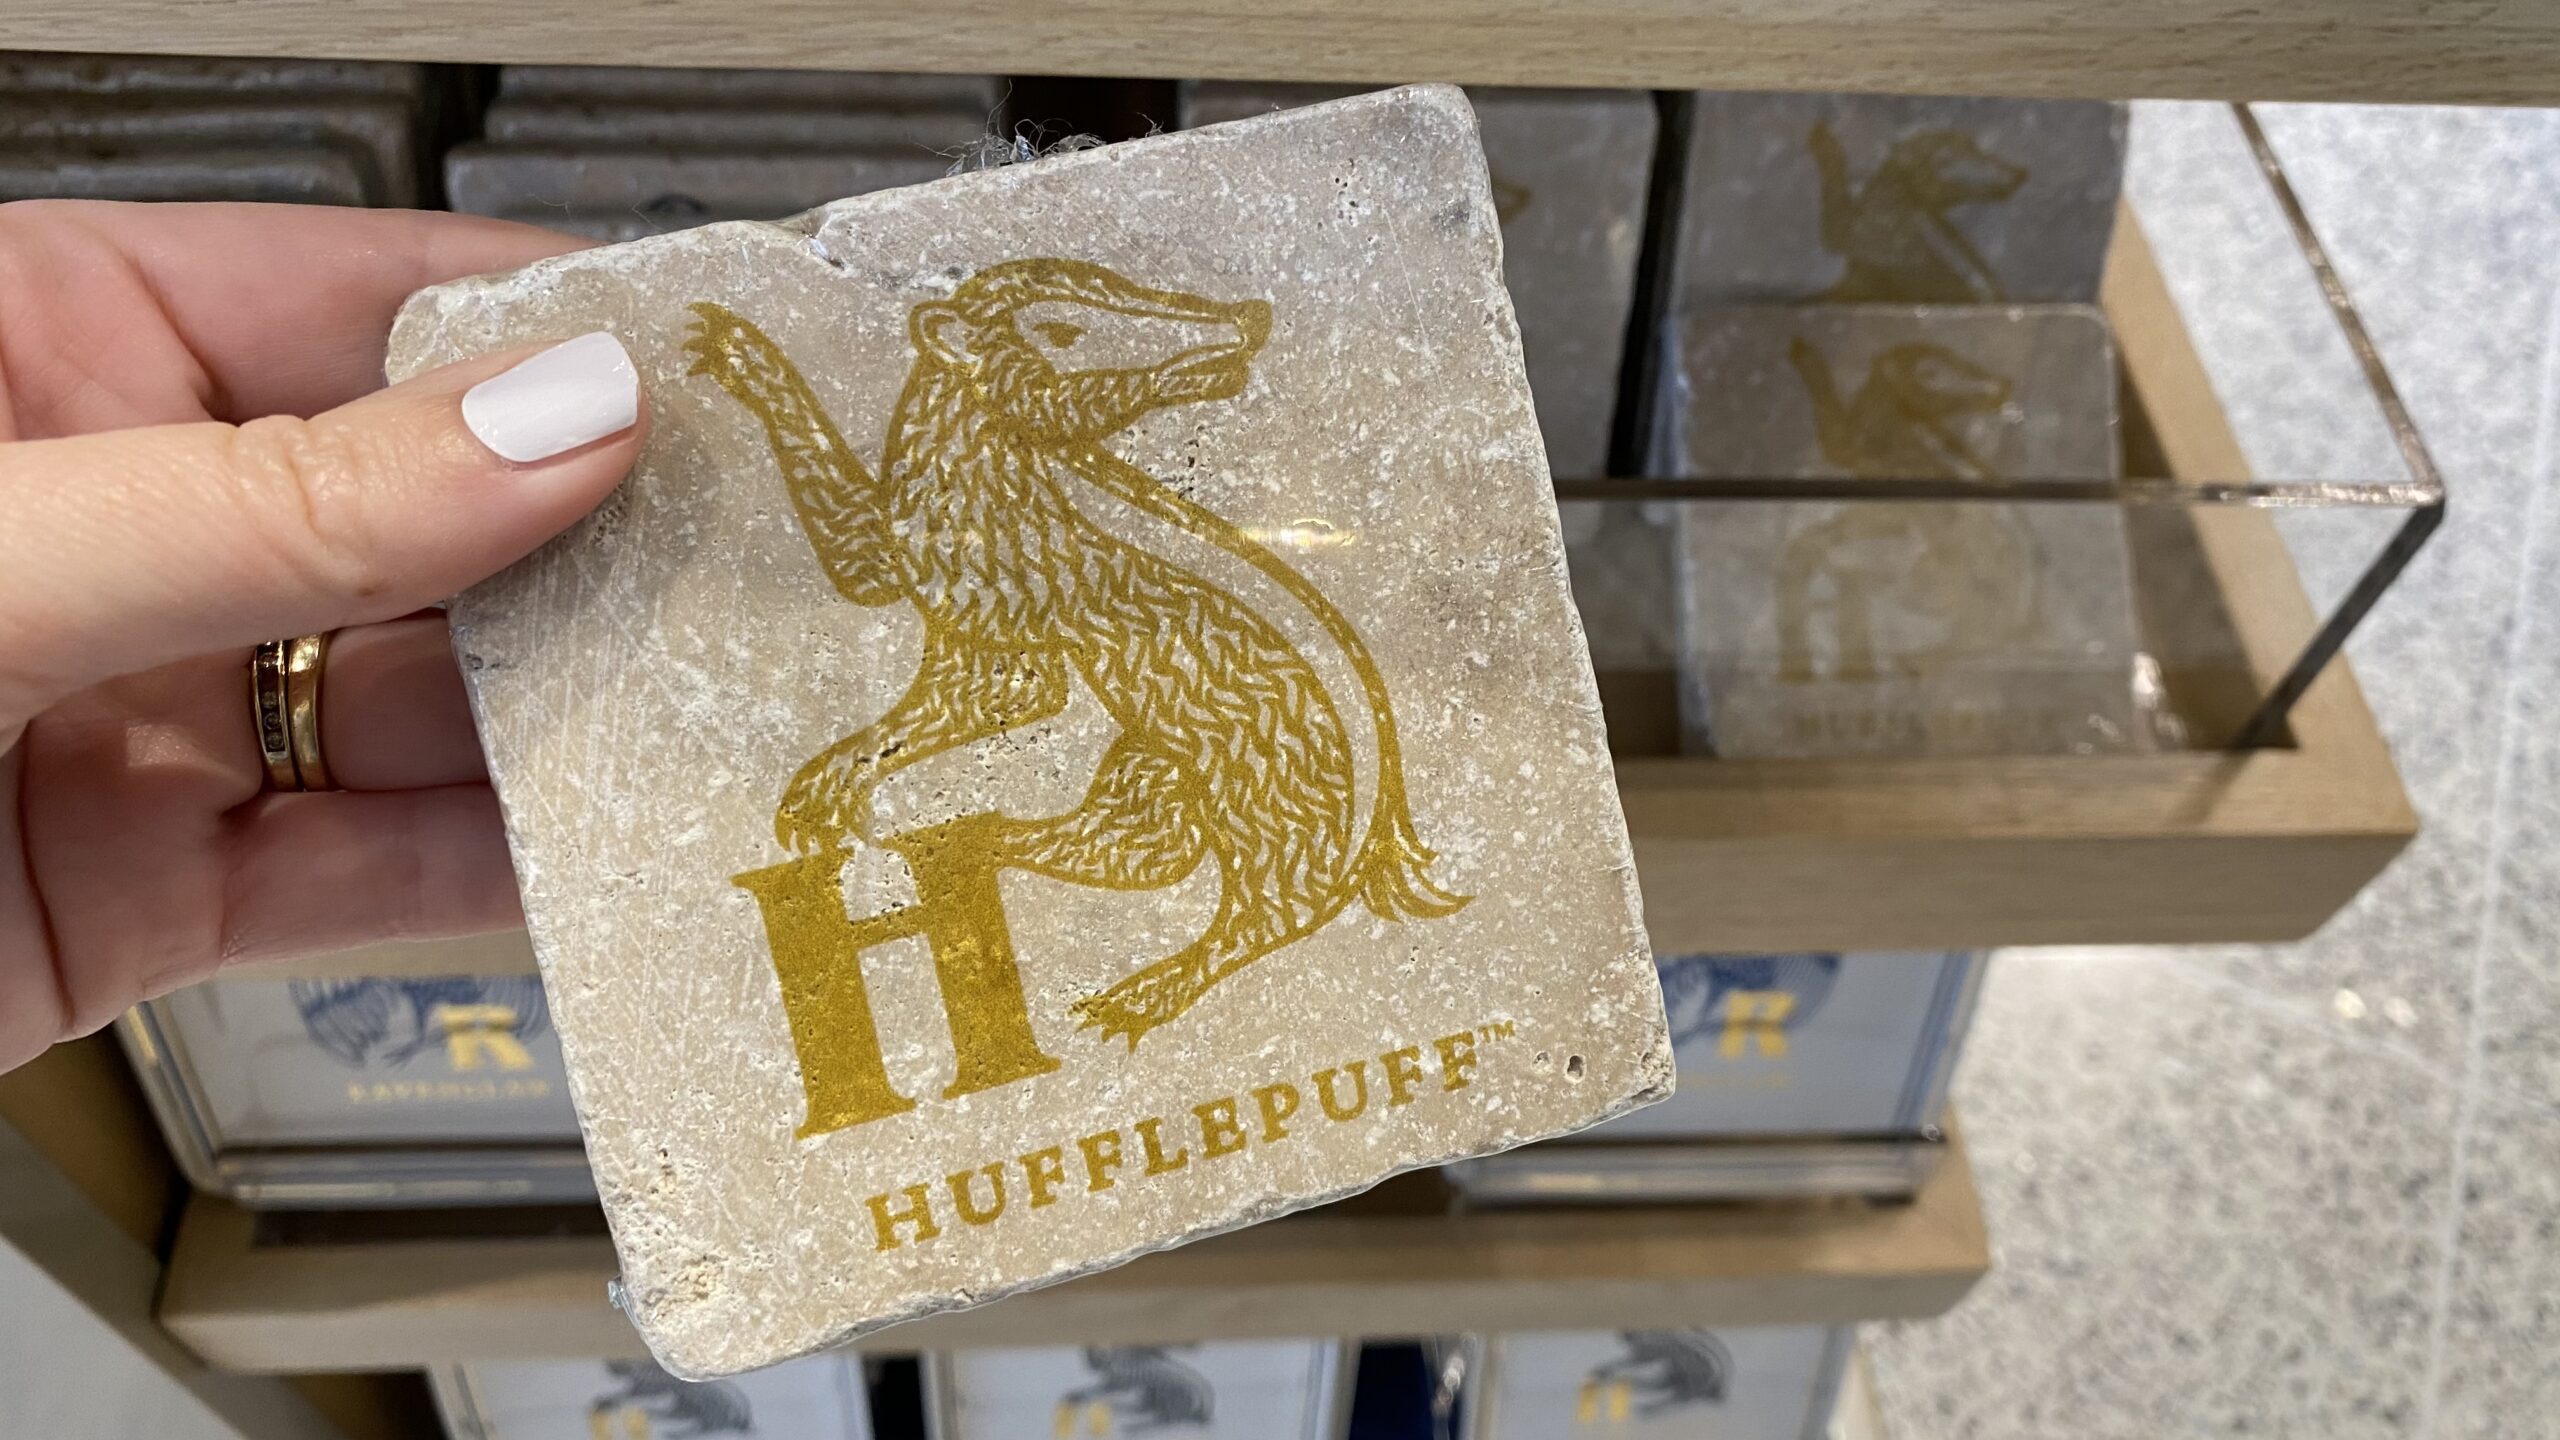 New Harry Potter Kitchen and Home Decor at Universal Studios Store